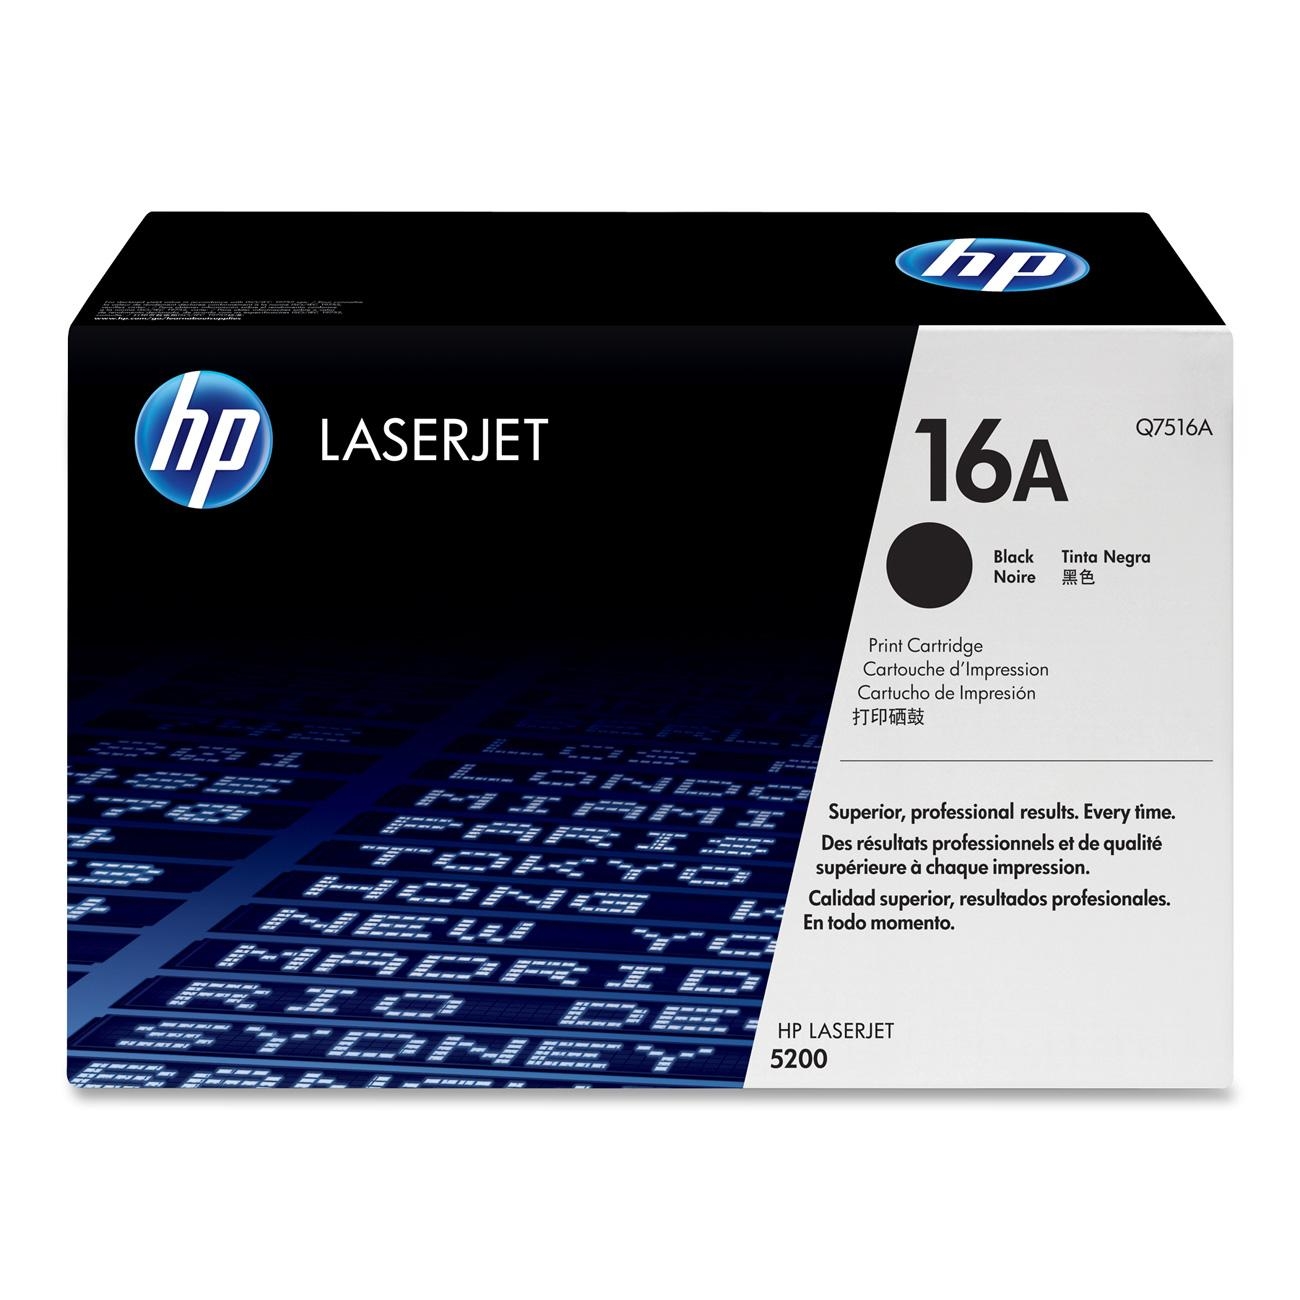 HP 16A Black Cartridge with Smart Printing Technology (Q7516A)